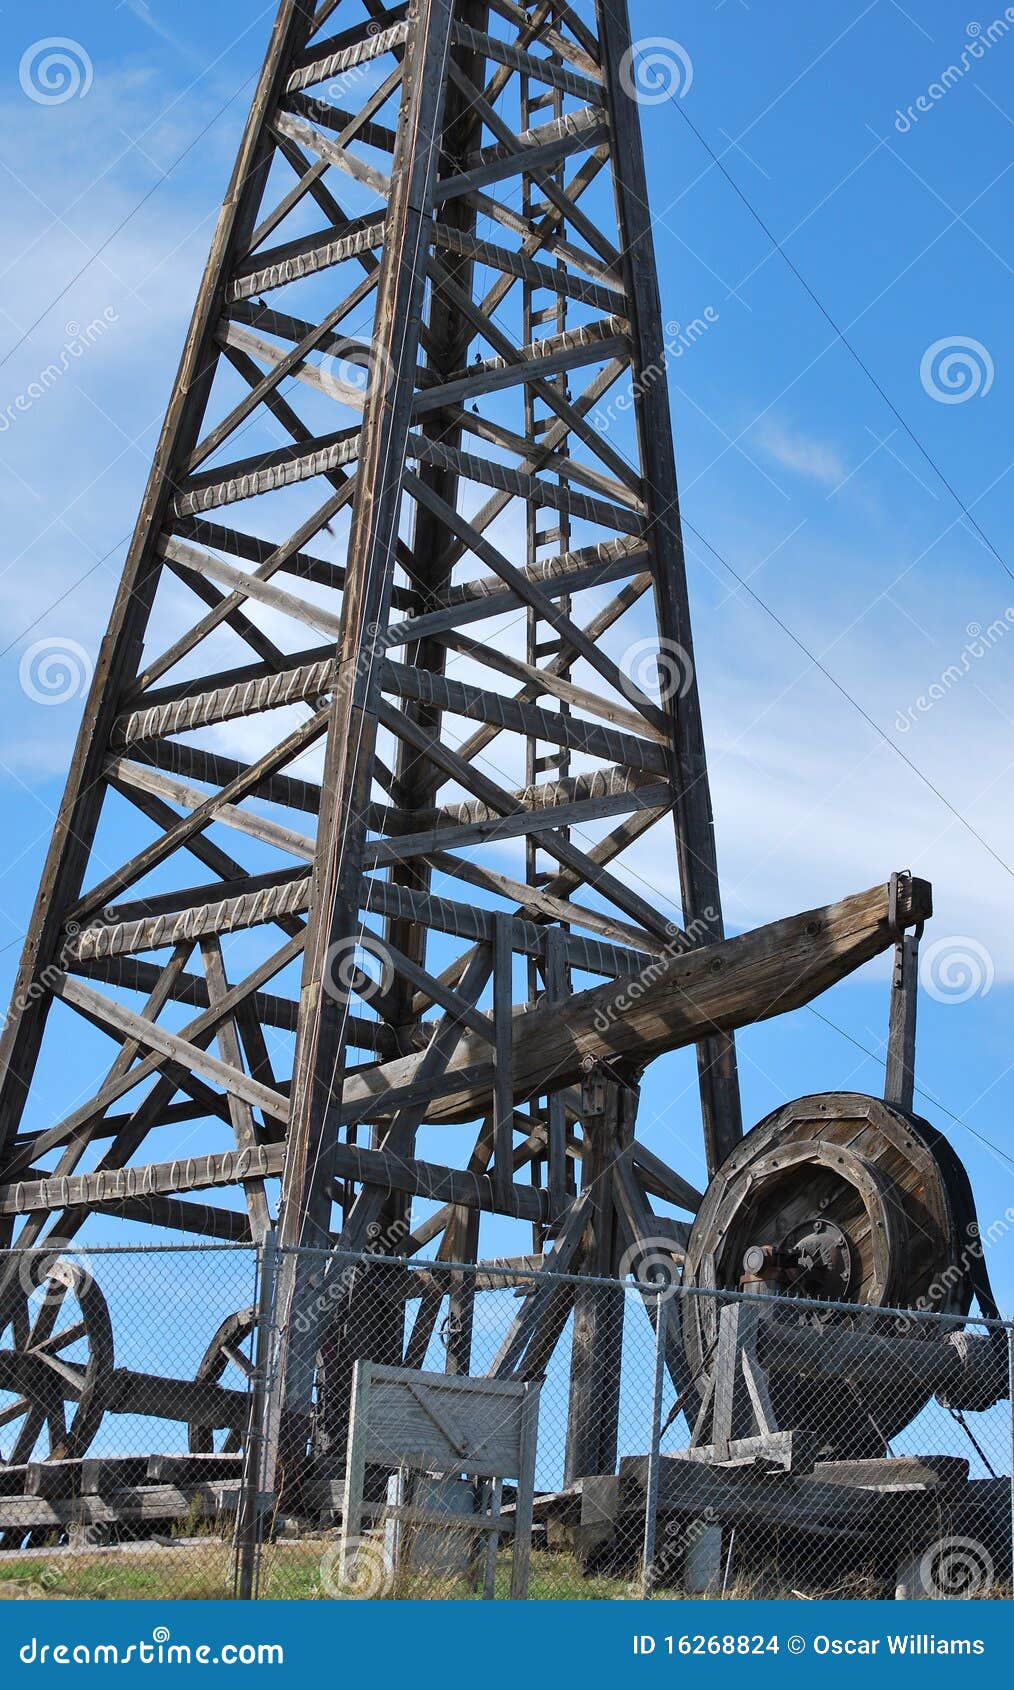 Wooden Oil Rig. Stock Images - Image: 16268824